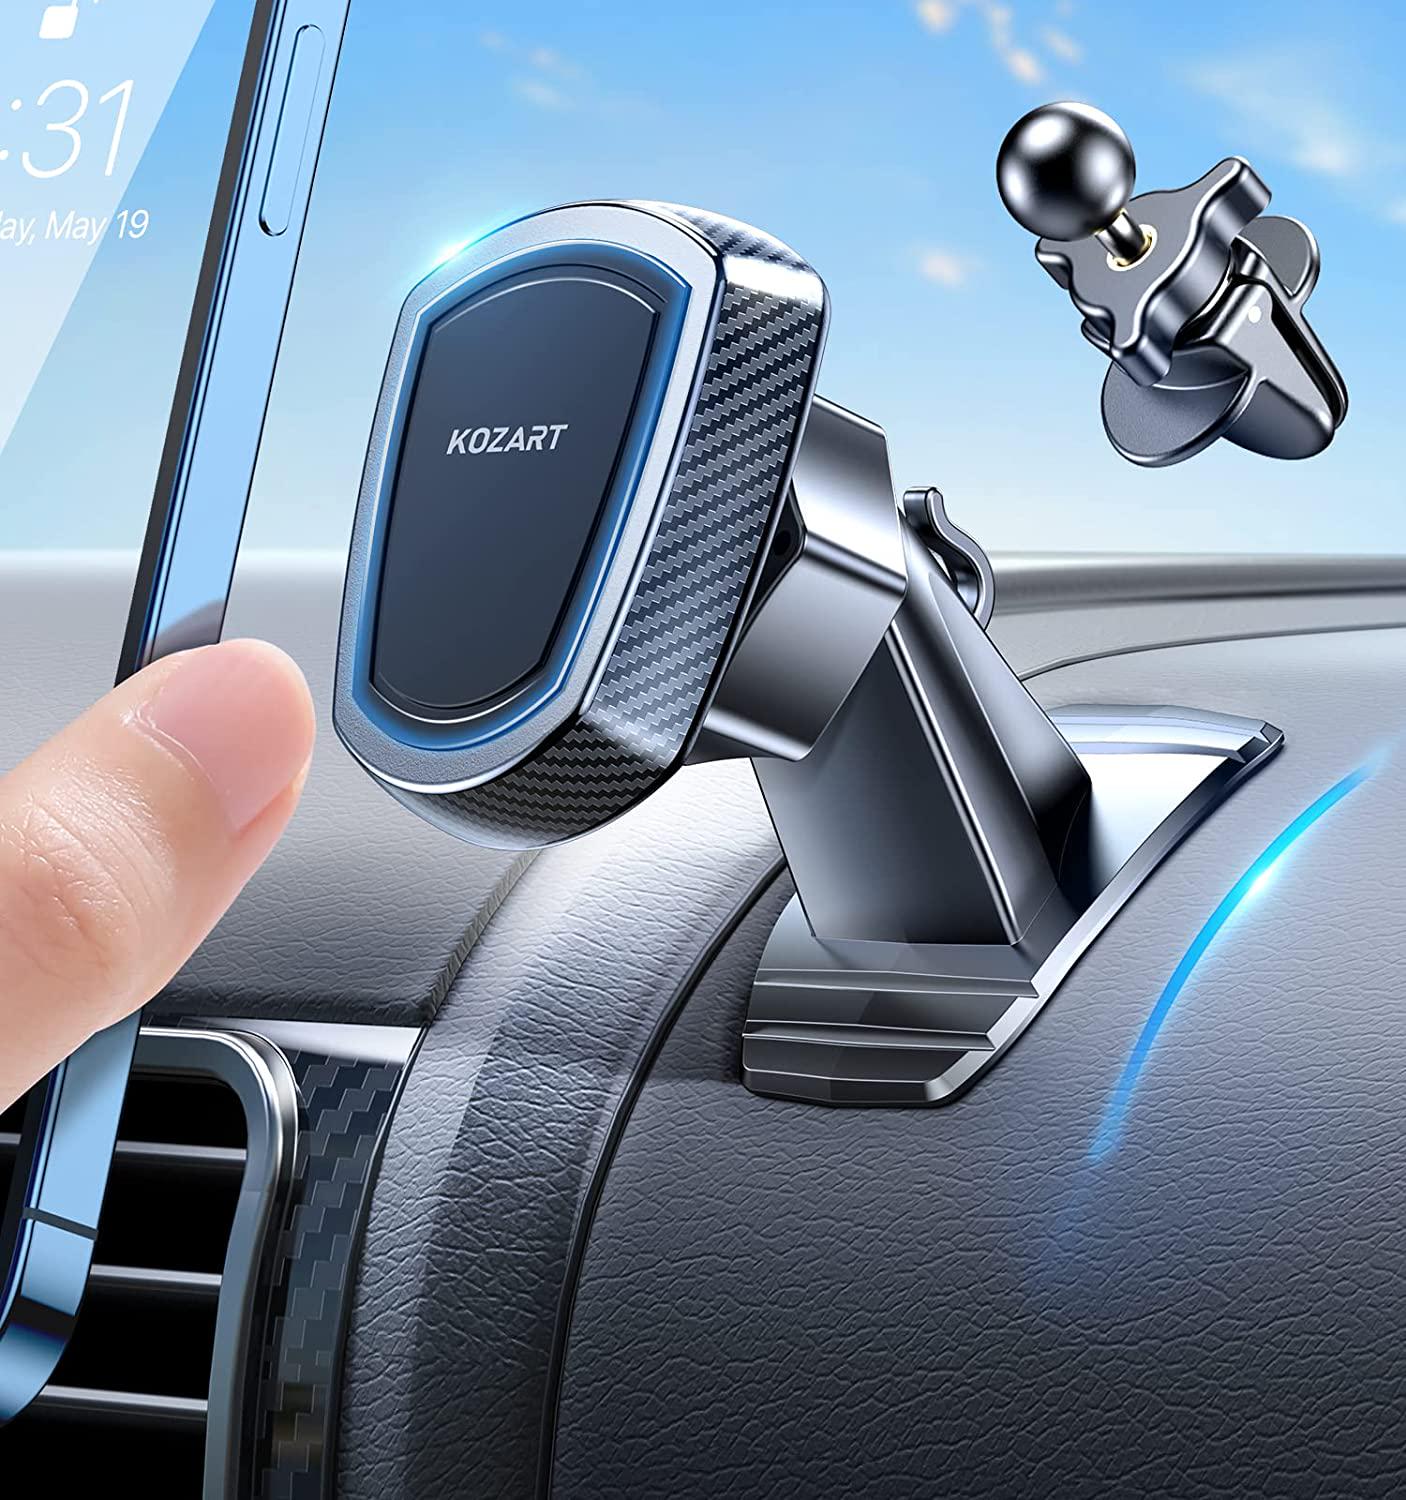 Kozart, Magnetic Phone Holder for Car, Kozart Universal [Upgrade Kit] Magnet Car Mount for Dashboard and Vent 360°Rotation Cell Phone Mount Compatible with iPhone, Samsung, LG, GPS, Mini Tablet and More